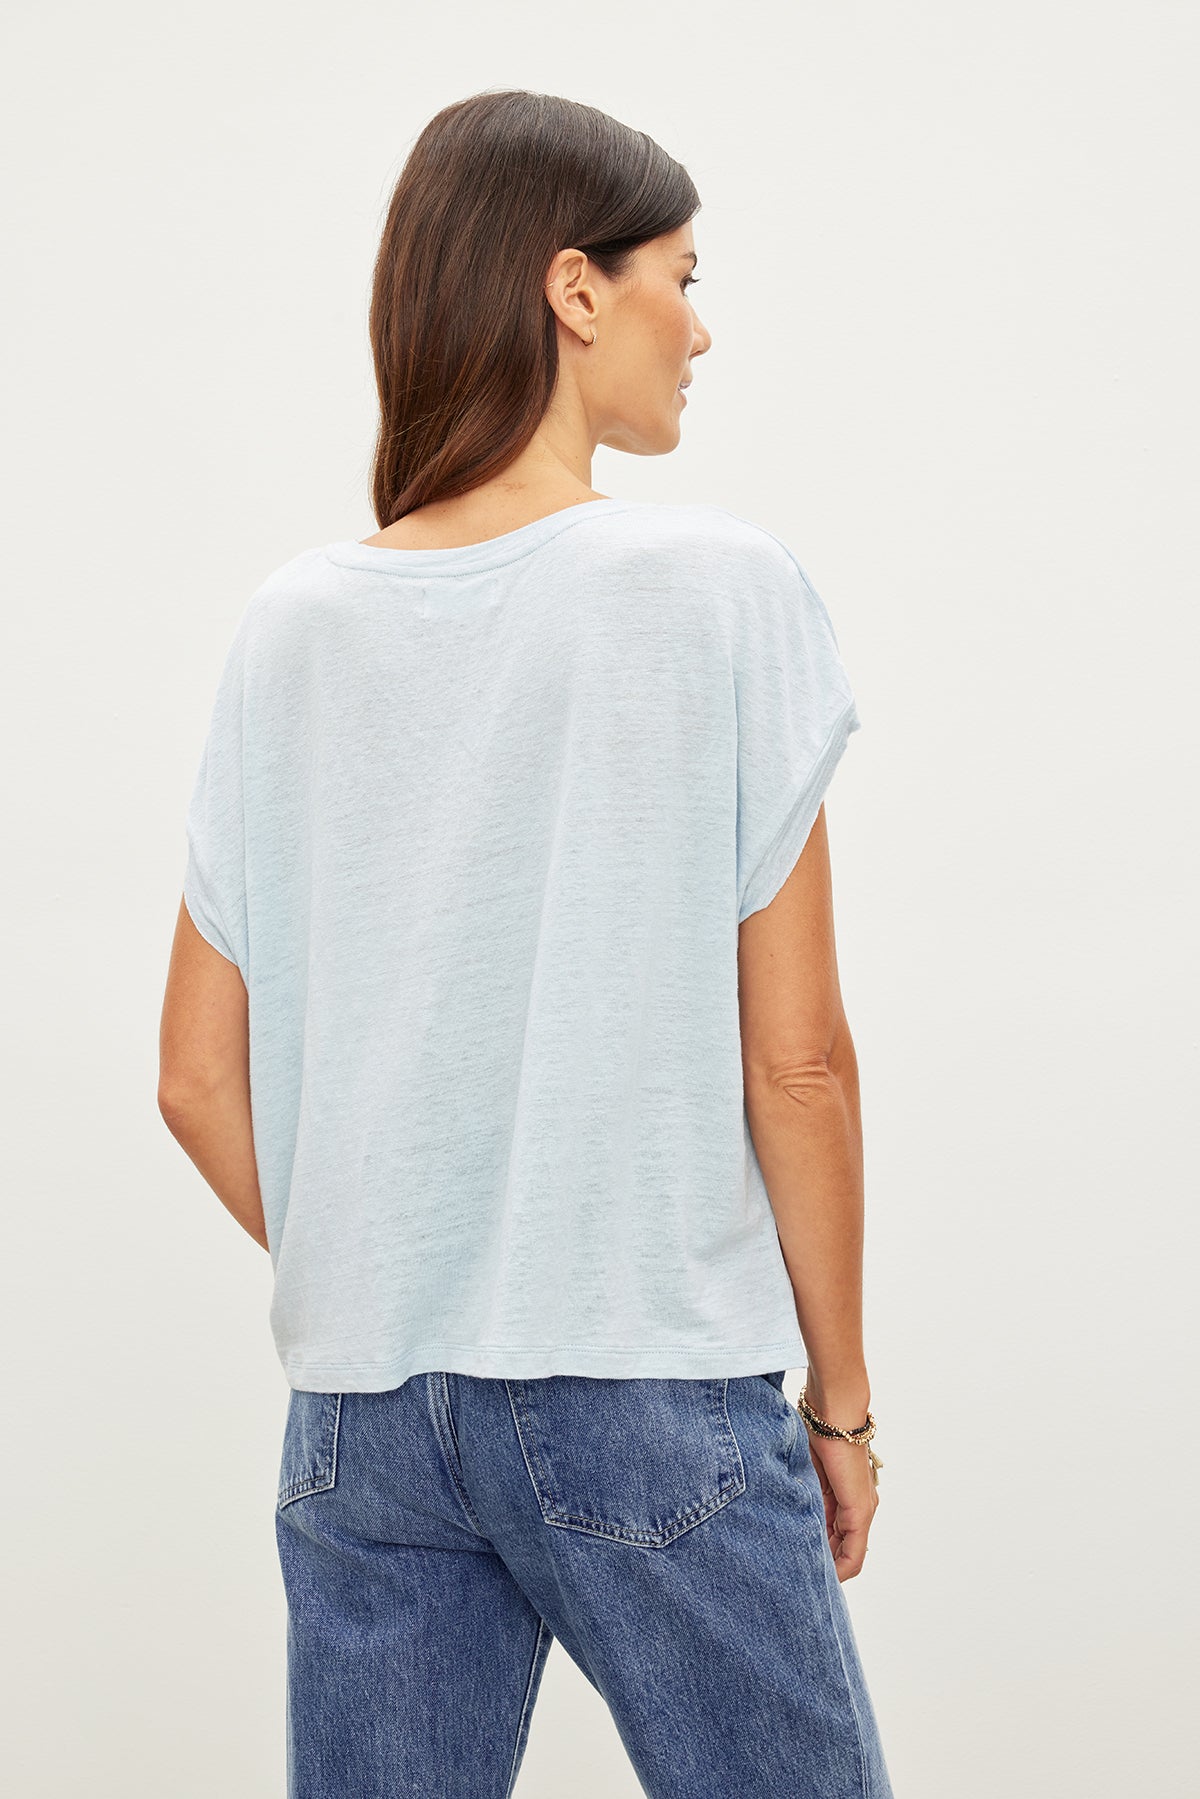 The back view of a woman wearing jeans and a HUDSON CREW NECK TEE by Velvet by Graham & Spencer.-35967645319361